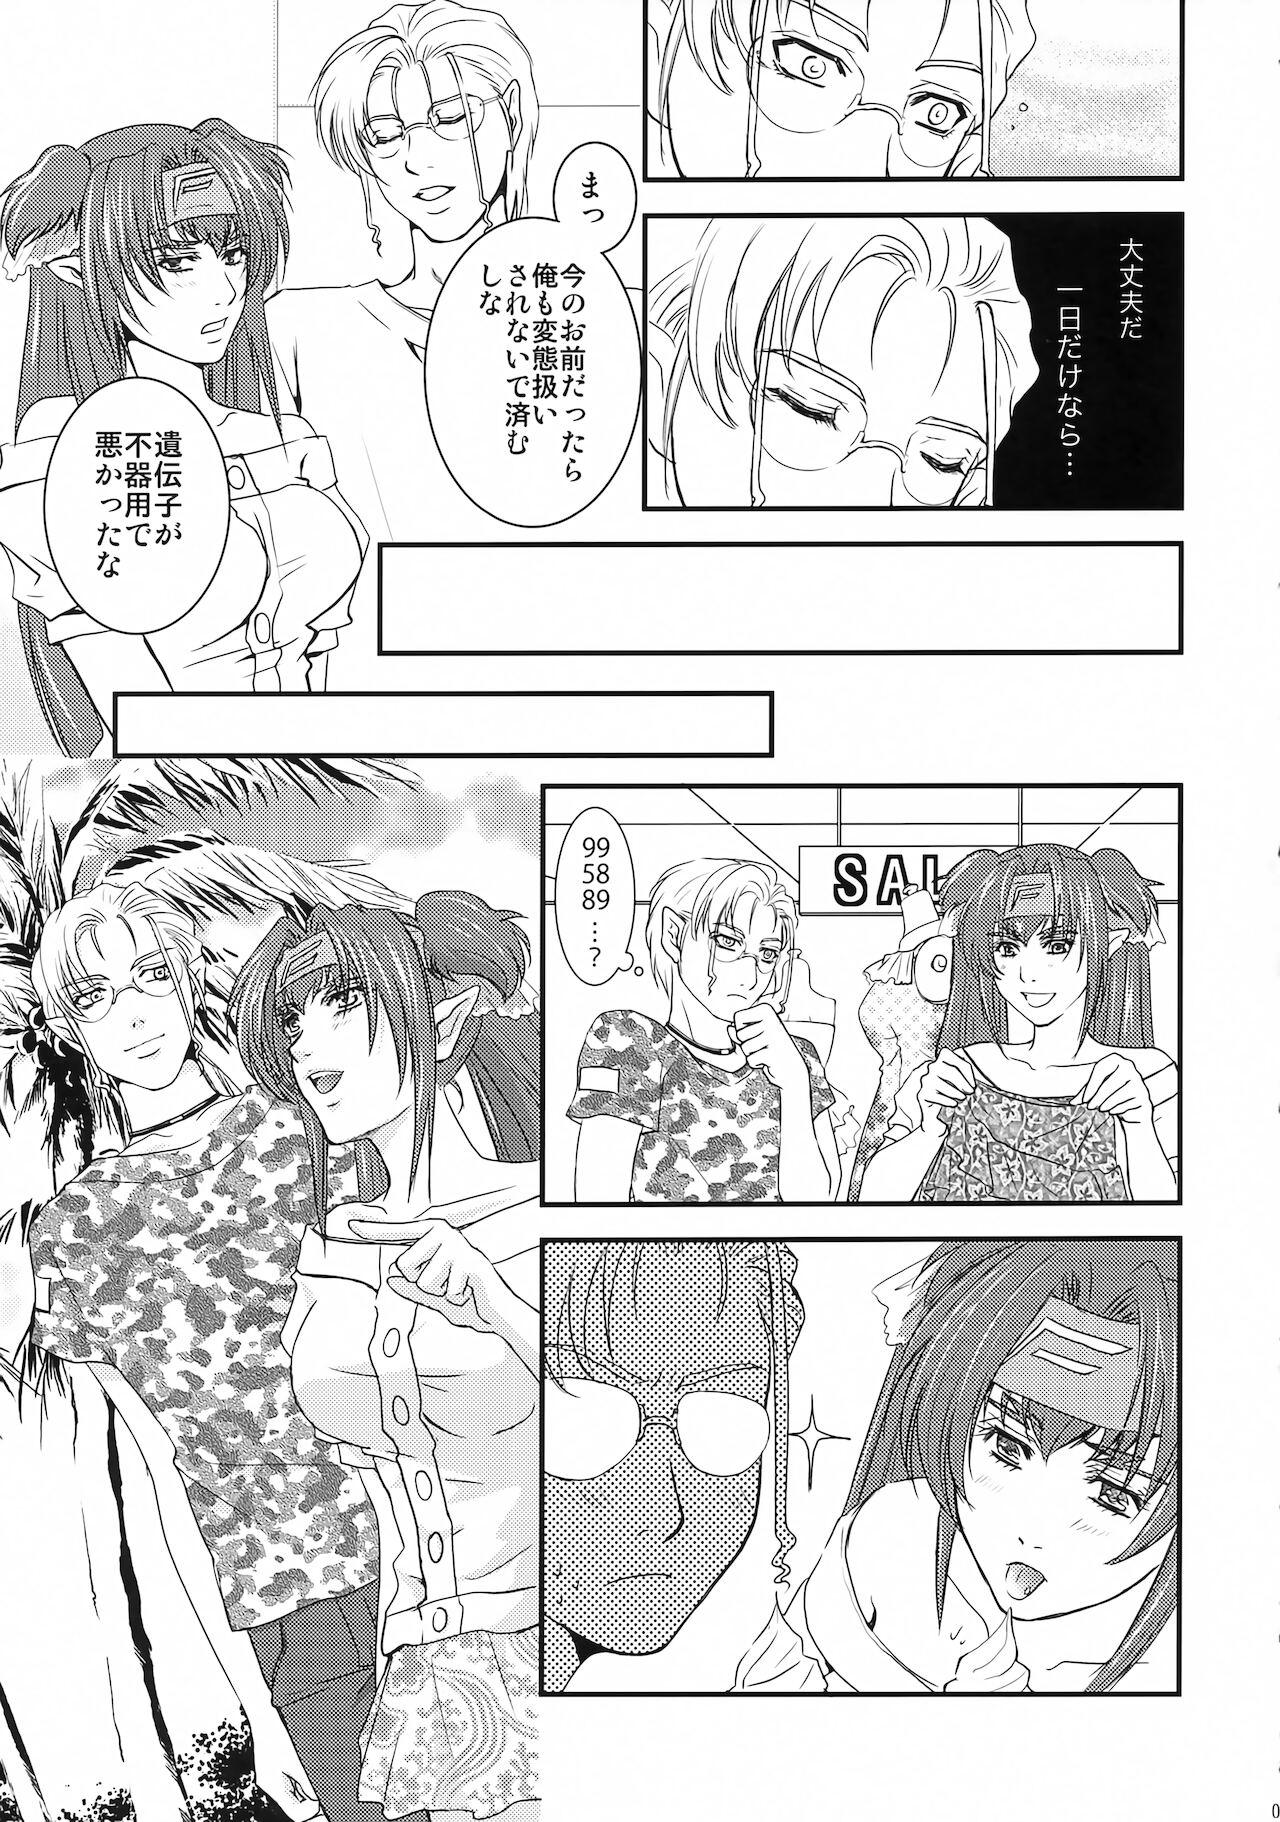 Grandmother Synthetic - Macross frontier Foot Job - Page 9